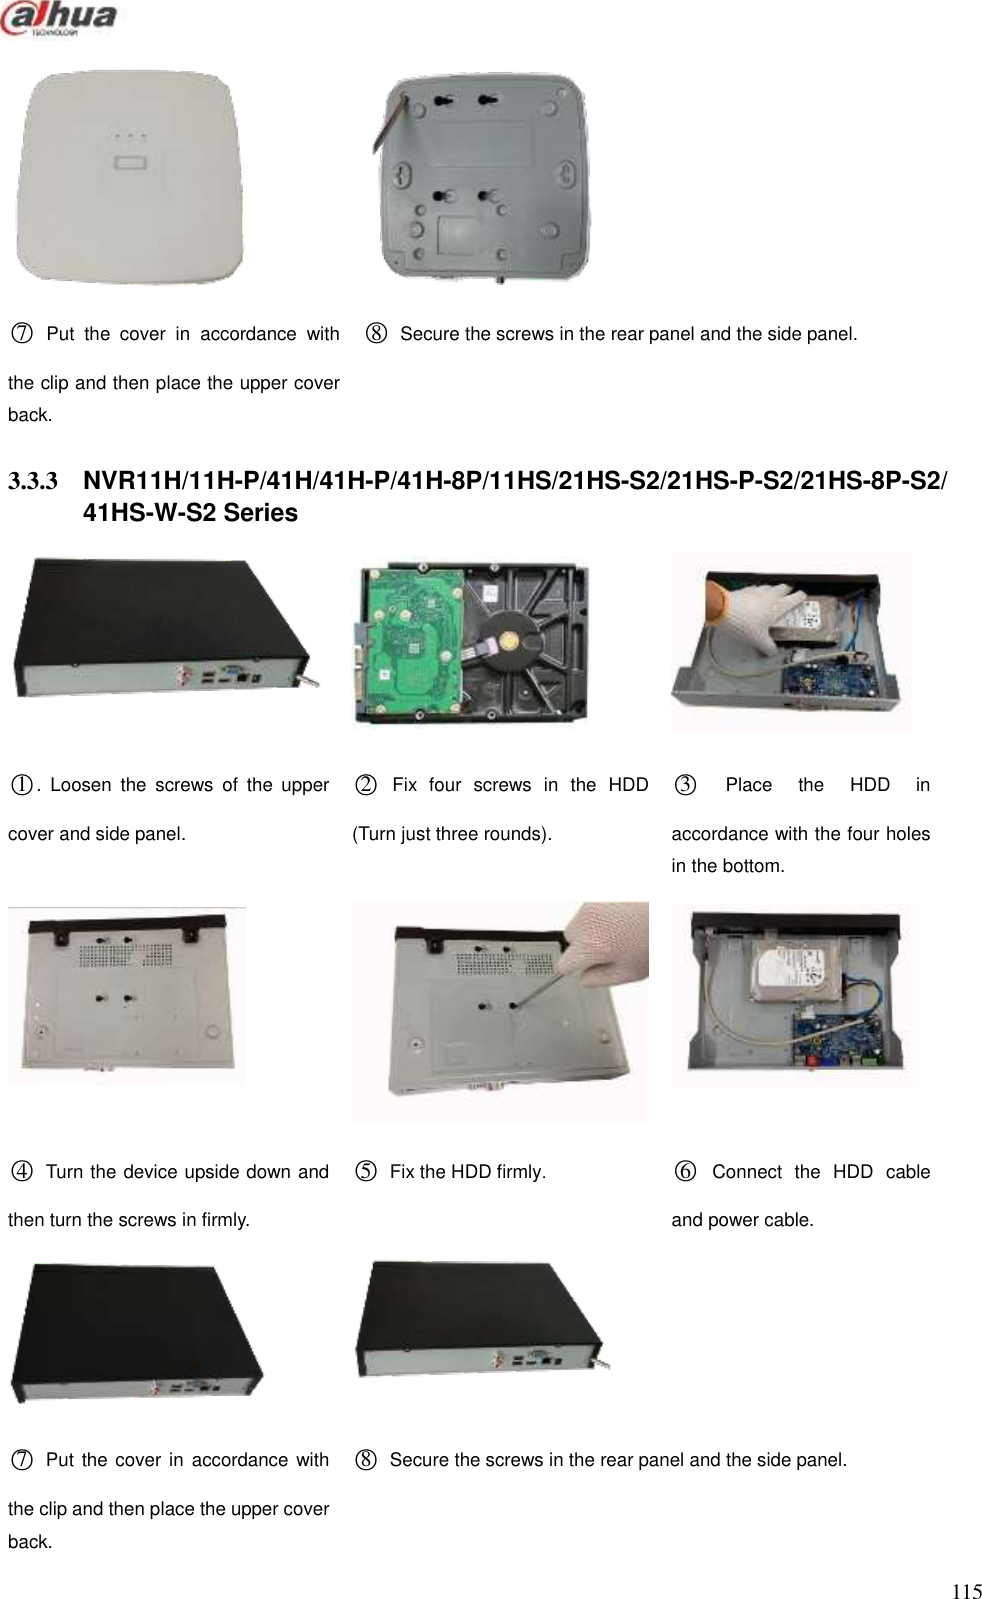  115     ○7  Put  the  cover  in  accordance  with the clip and then place the upper cover back.         ○8  Secure the screws in the rear panel and the side panel.  3.3.3  NVR11H/11H-P/41H/41H-P/41H-8P/11HS/21HS-S2/21HS-P-S2/21HS-8P-S2/ 41HS-W-S2 Series      ○1.  Loosen  the  screws  of  the  upper cover and side panel.       ○2  Fix  four  screws  in  the  HDD (Turn just three rounds). ○3  Place  the  HDD  in accordance with the four holes in the bottom.    ○4  Turn the device upside down and then turn the screws in firmly.     ○5  Fix the HDD firmly. ○6  Connect  the  HDD  cable and power cable.              ○7  Put  the cover in  accordance with the clip and then place the upper cover back.         ○8  Secure the screws in the rear panel and the side panel. 